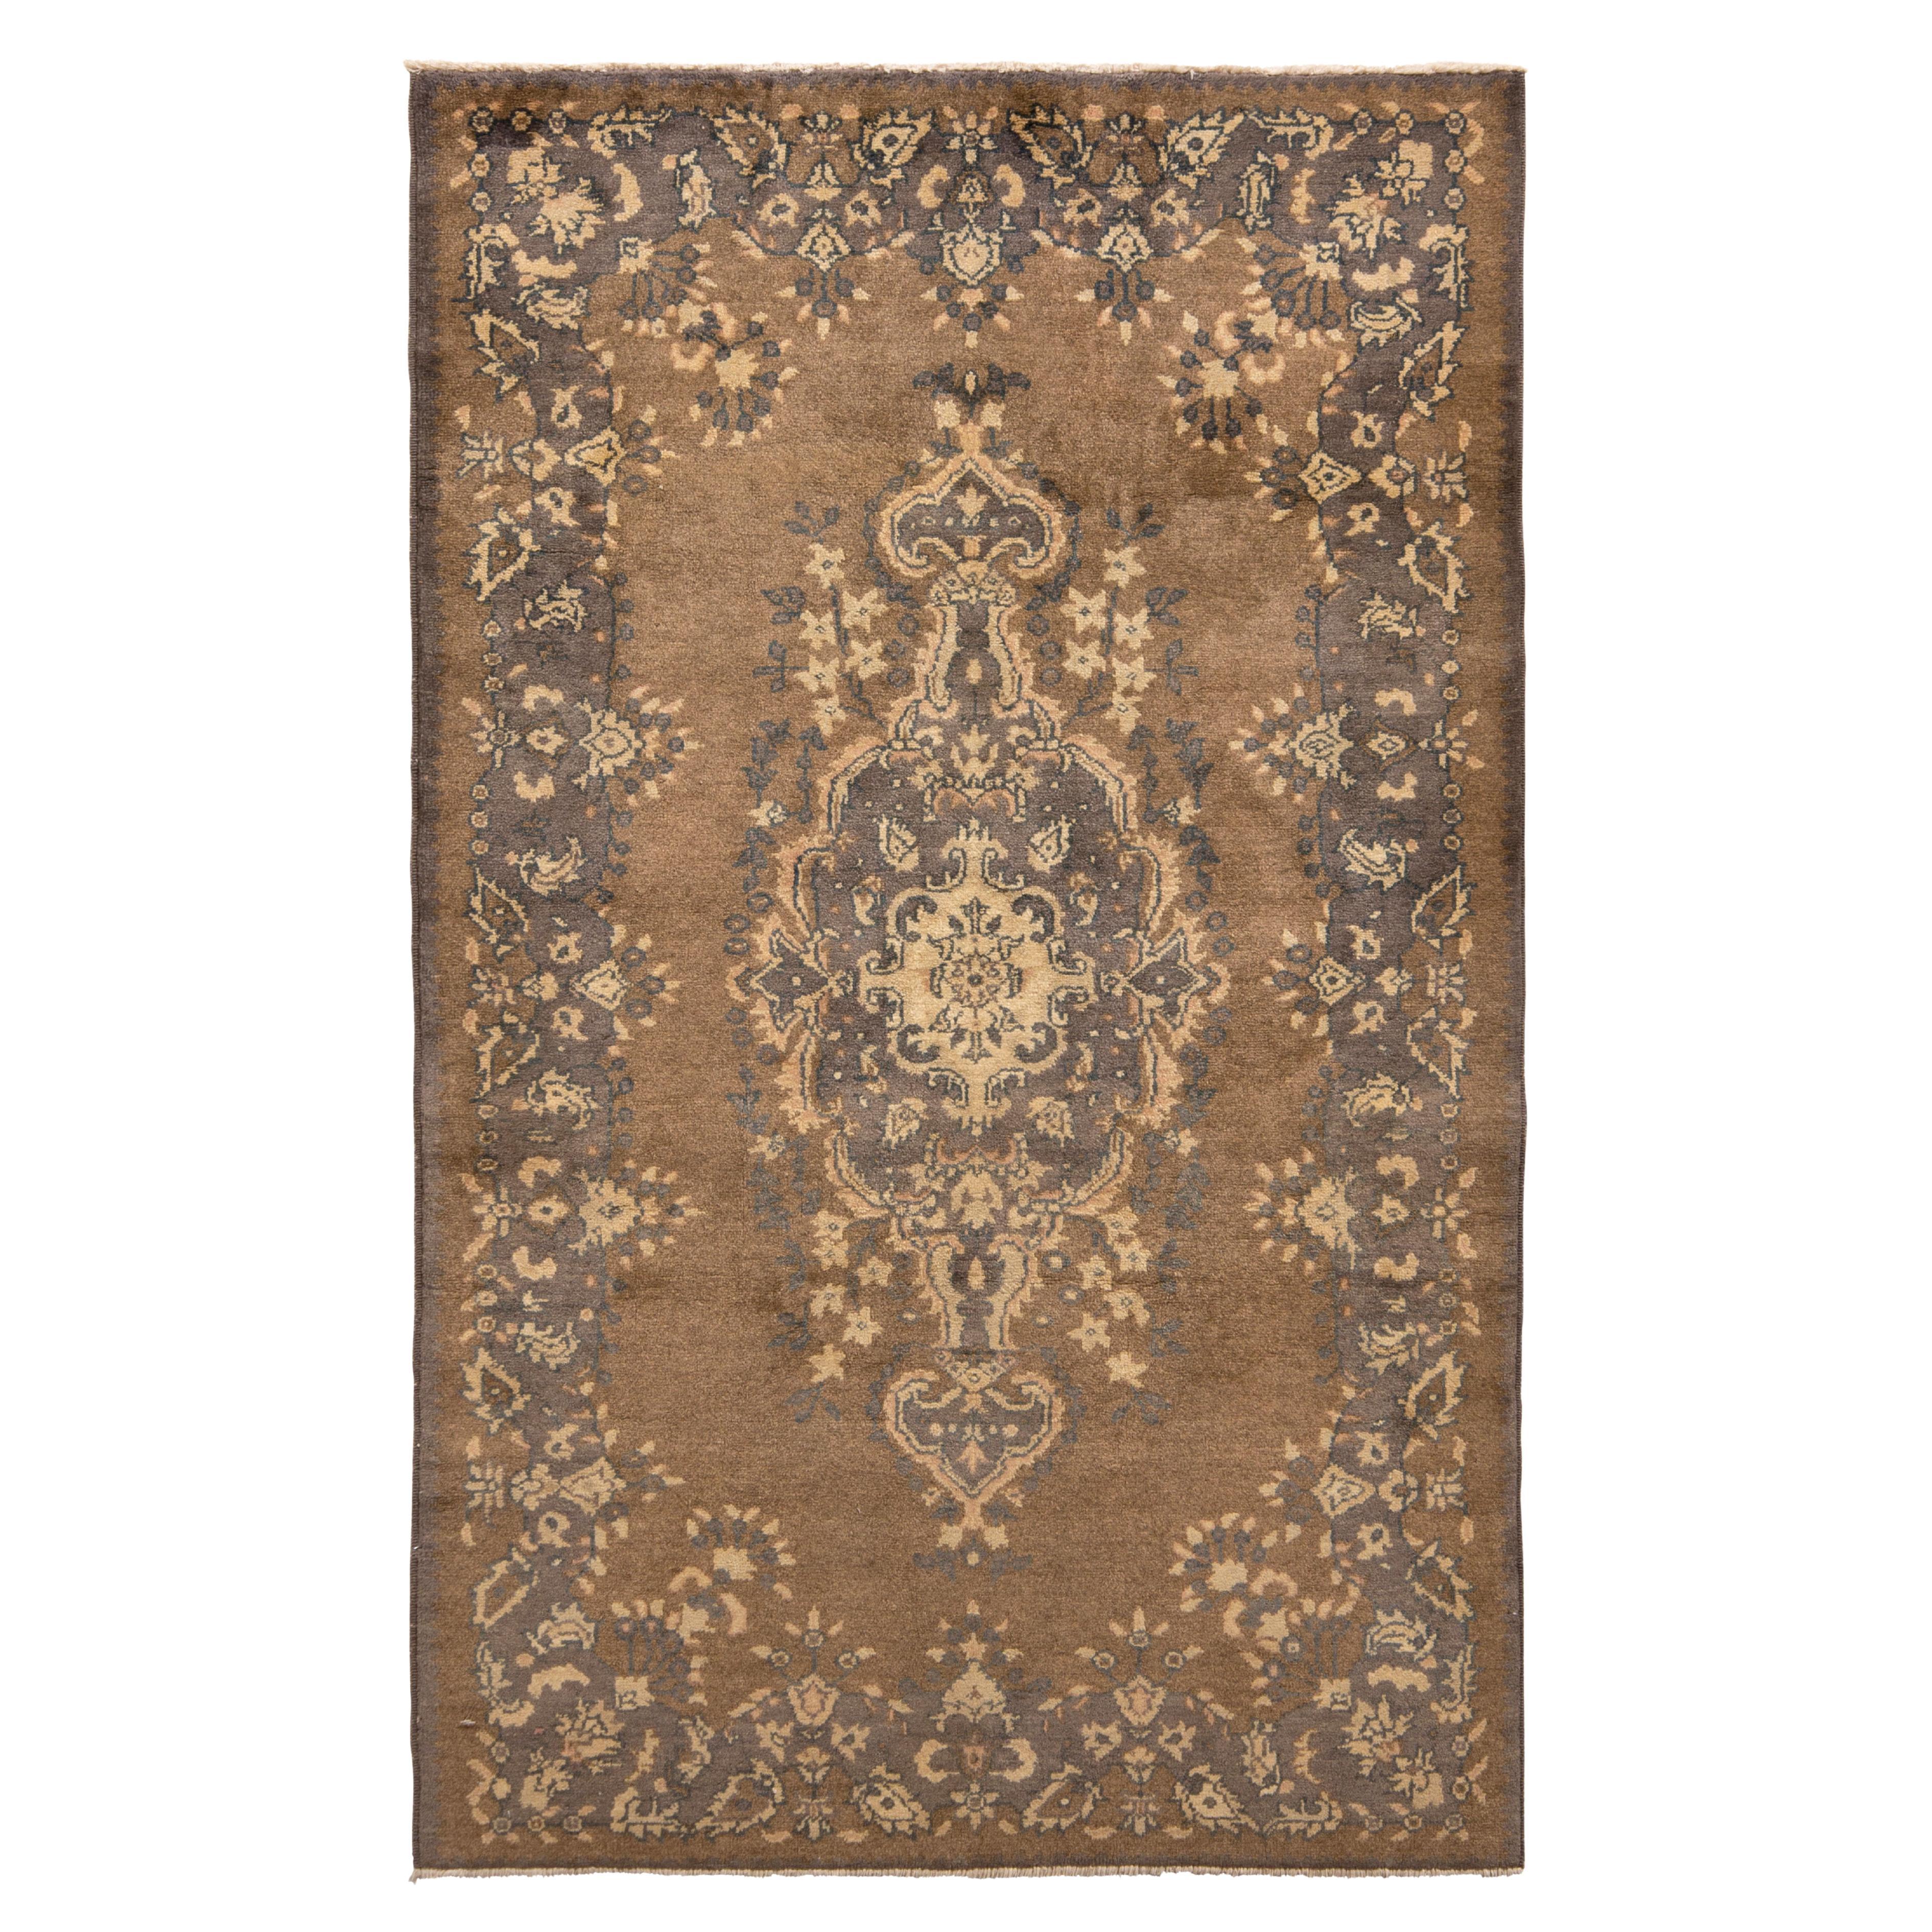 Hand-Knotted Vintage Sivas Rug in Beige-Brown with Medallion Floral Pattern For Sale